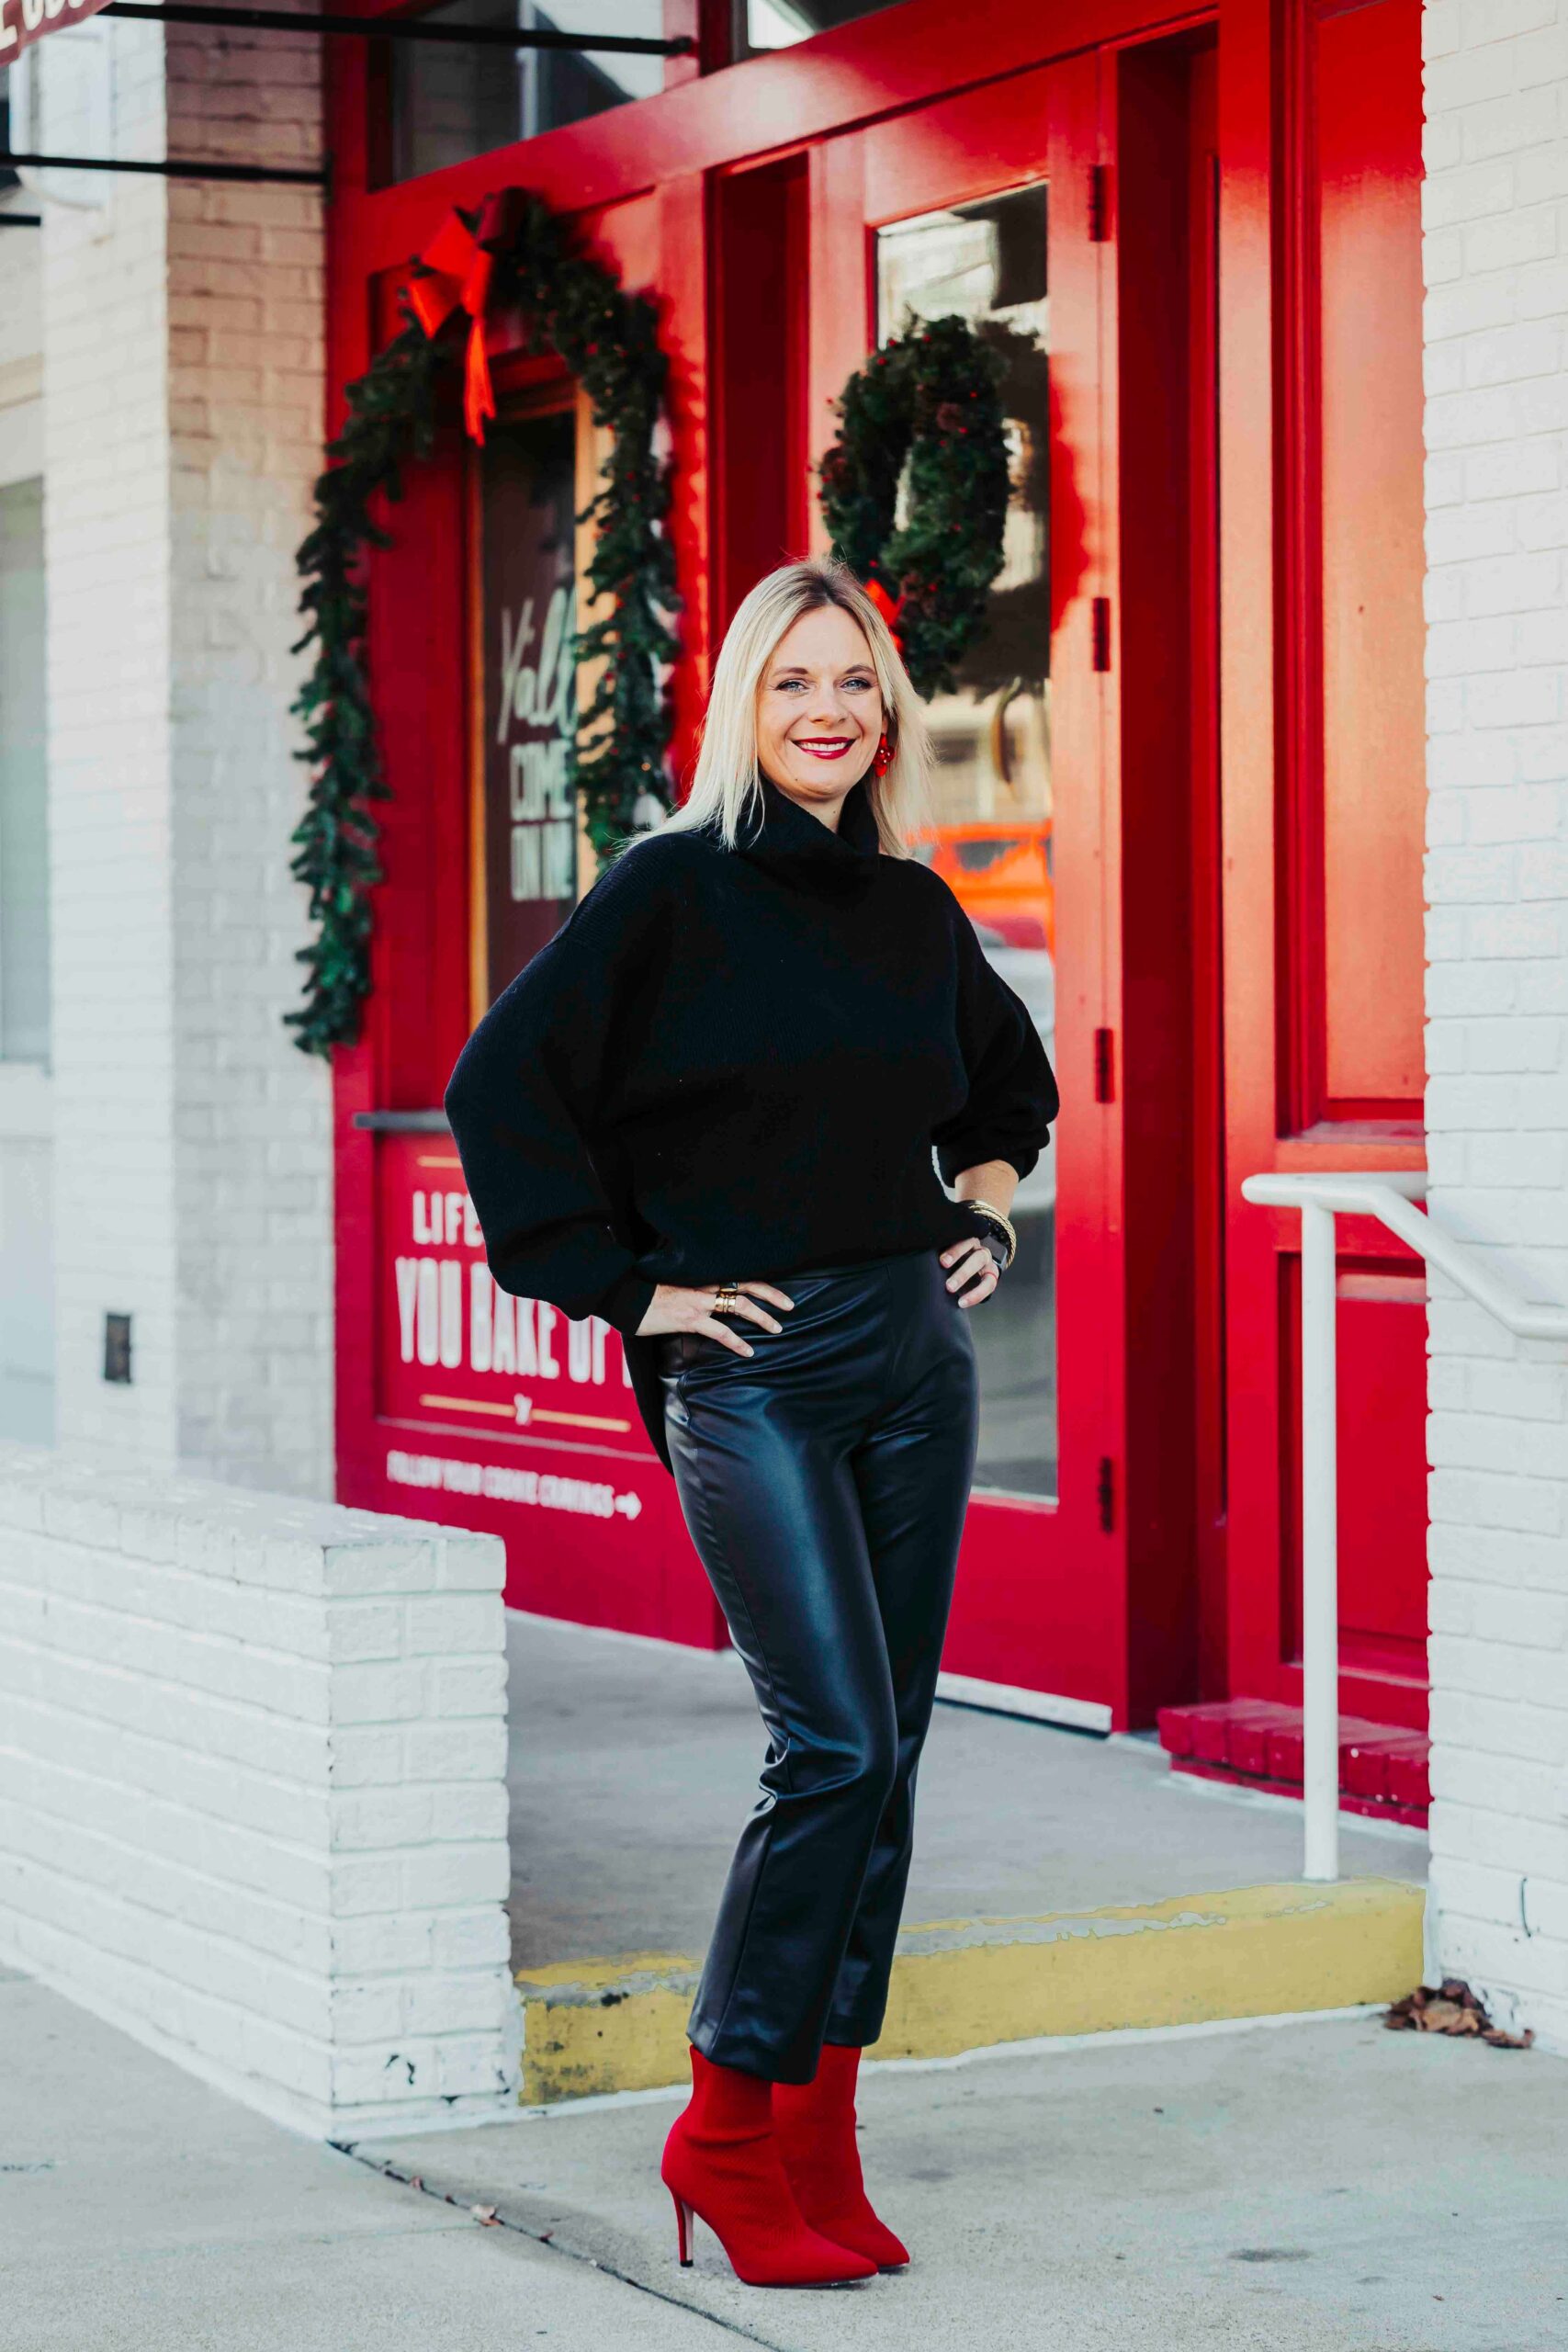 3 Ways To Wear Leather For The Holidays Turtleneck Sweater & Faux Leather Ankle Pants how to wear leather ankle pants how to wear all black for the holidays how to style red shoes what to wear to your office Christmas party what to wear to your work holiday party styled looks for the holidays